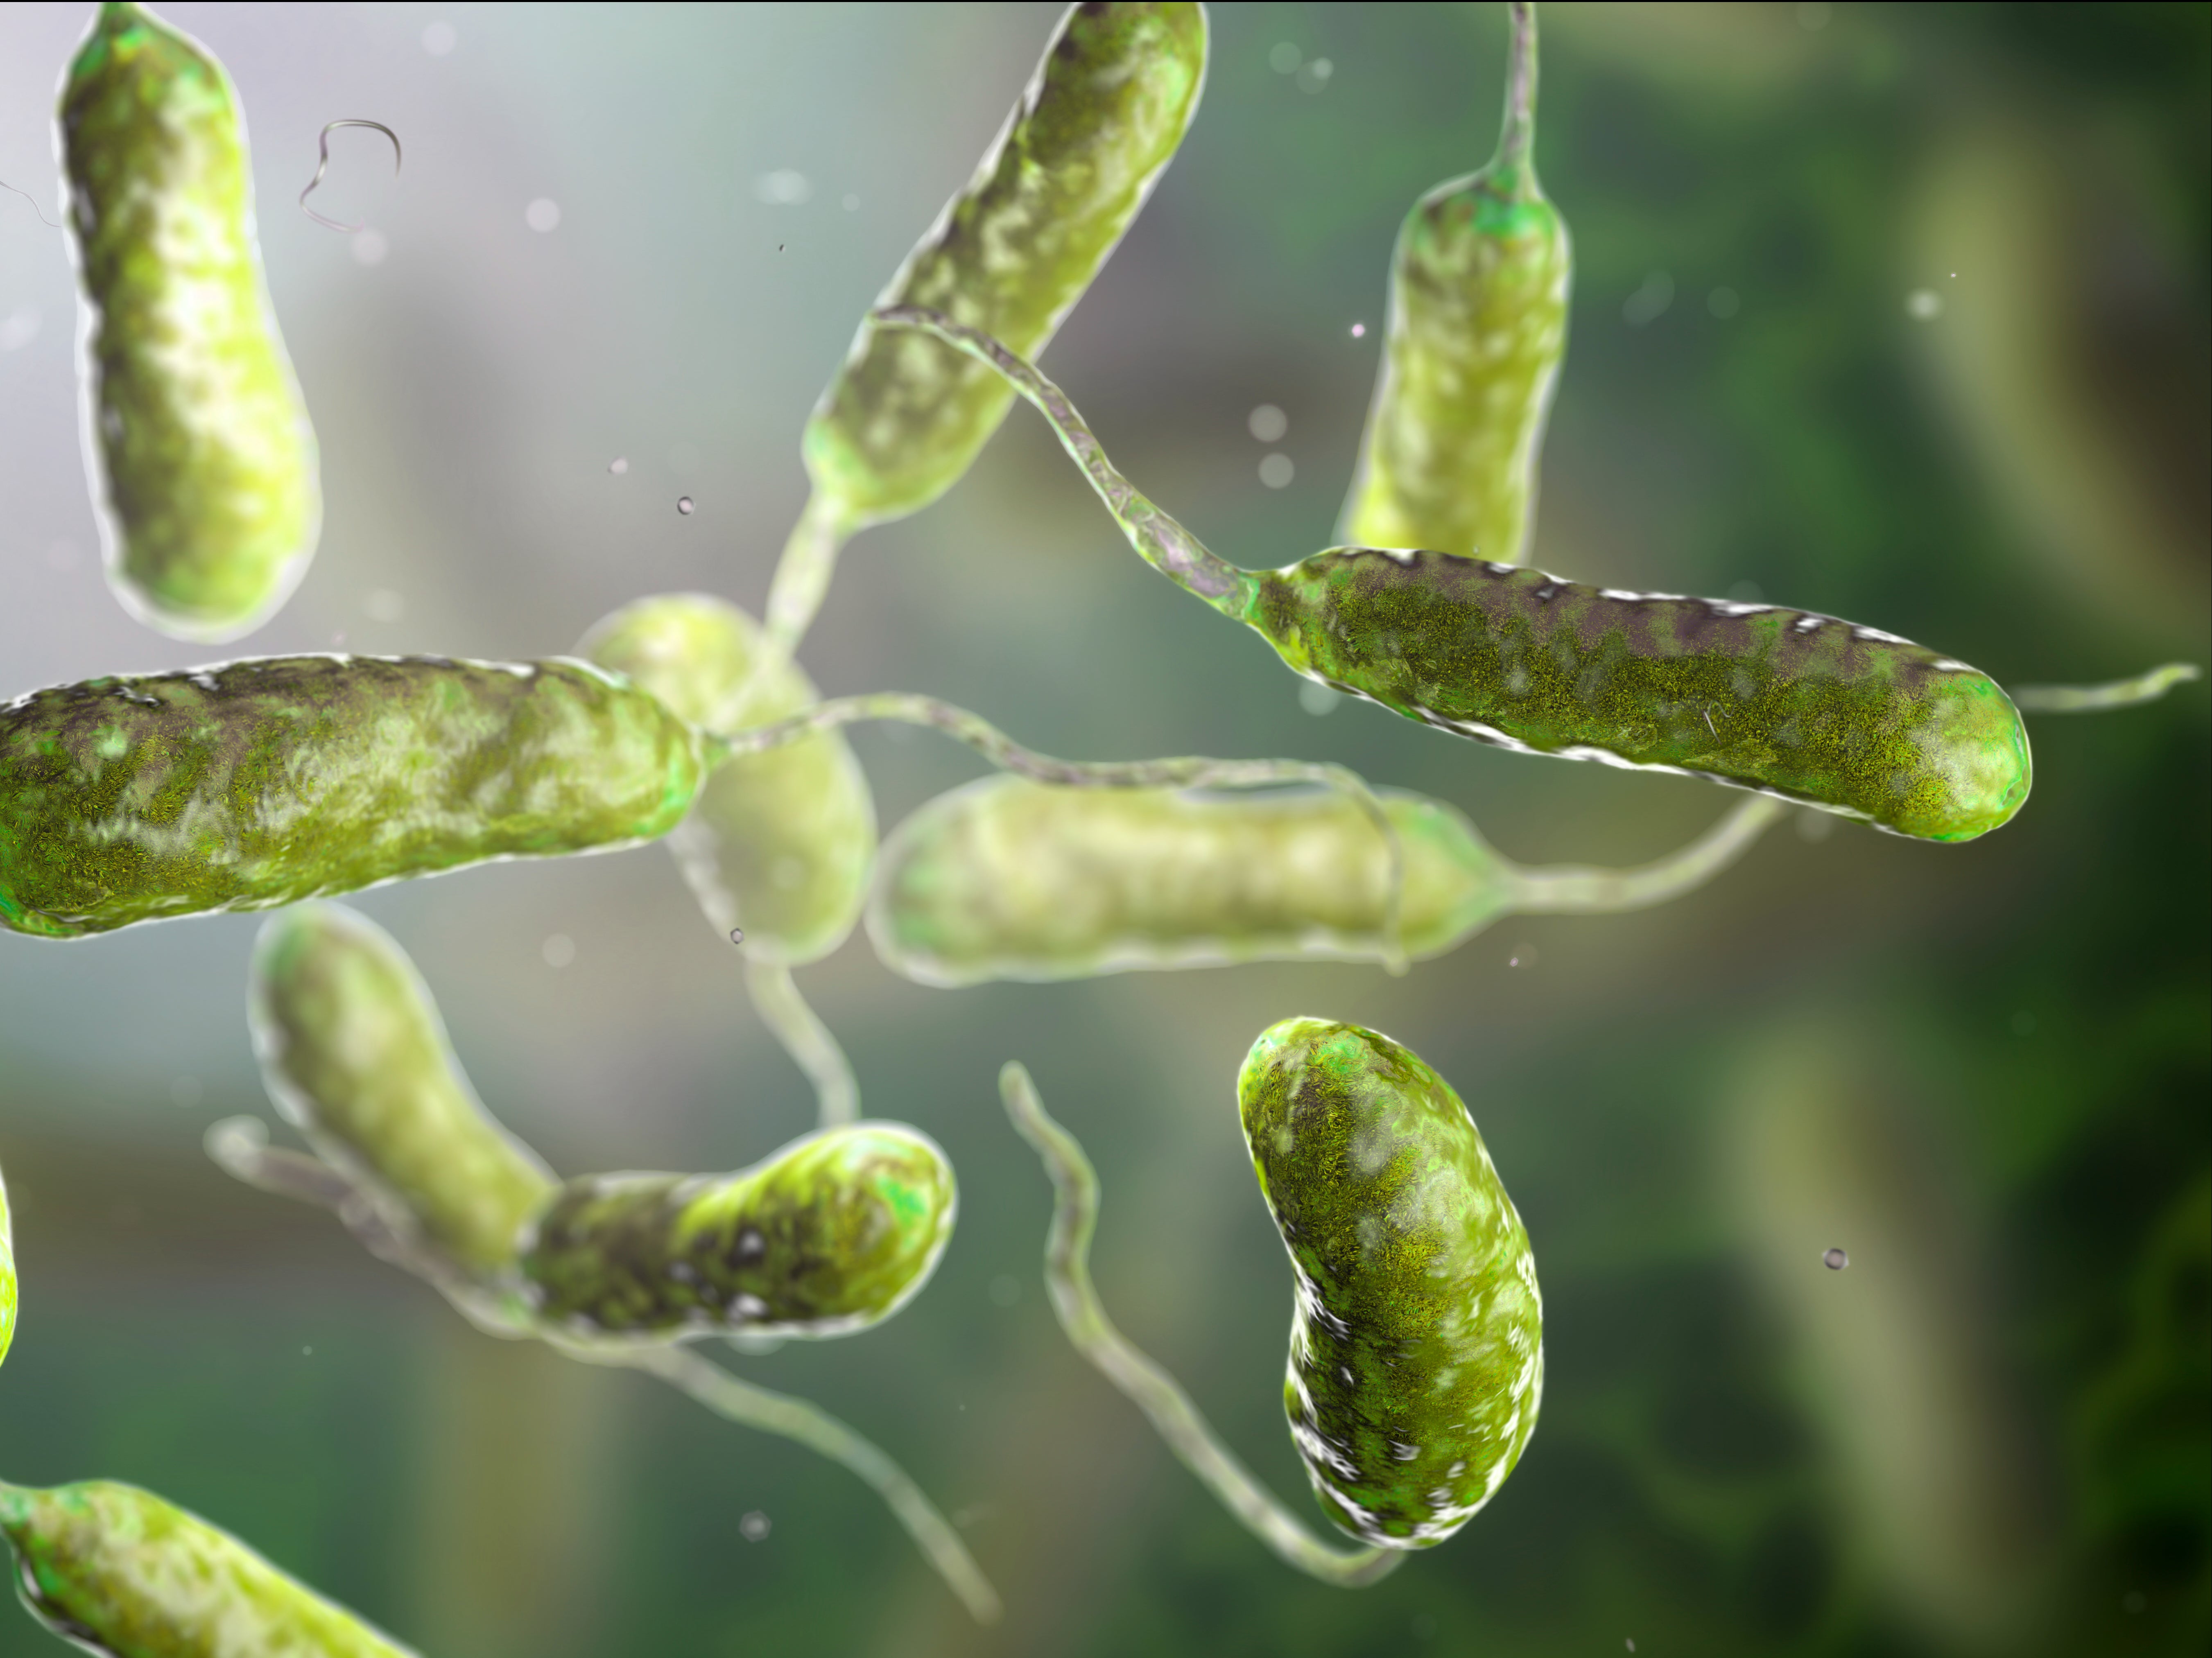 The vibrio vulnificus bacterium is mostly found in warm seawater